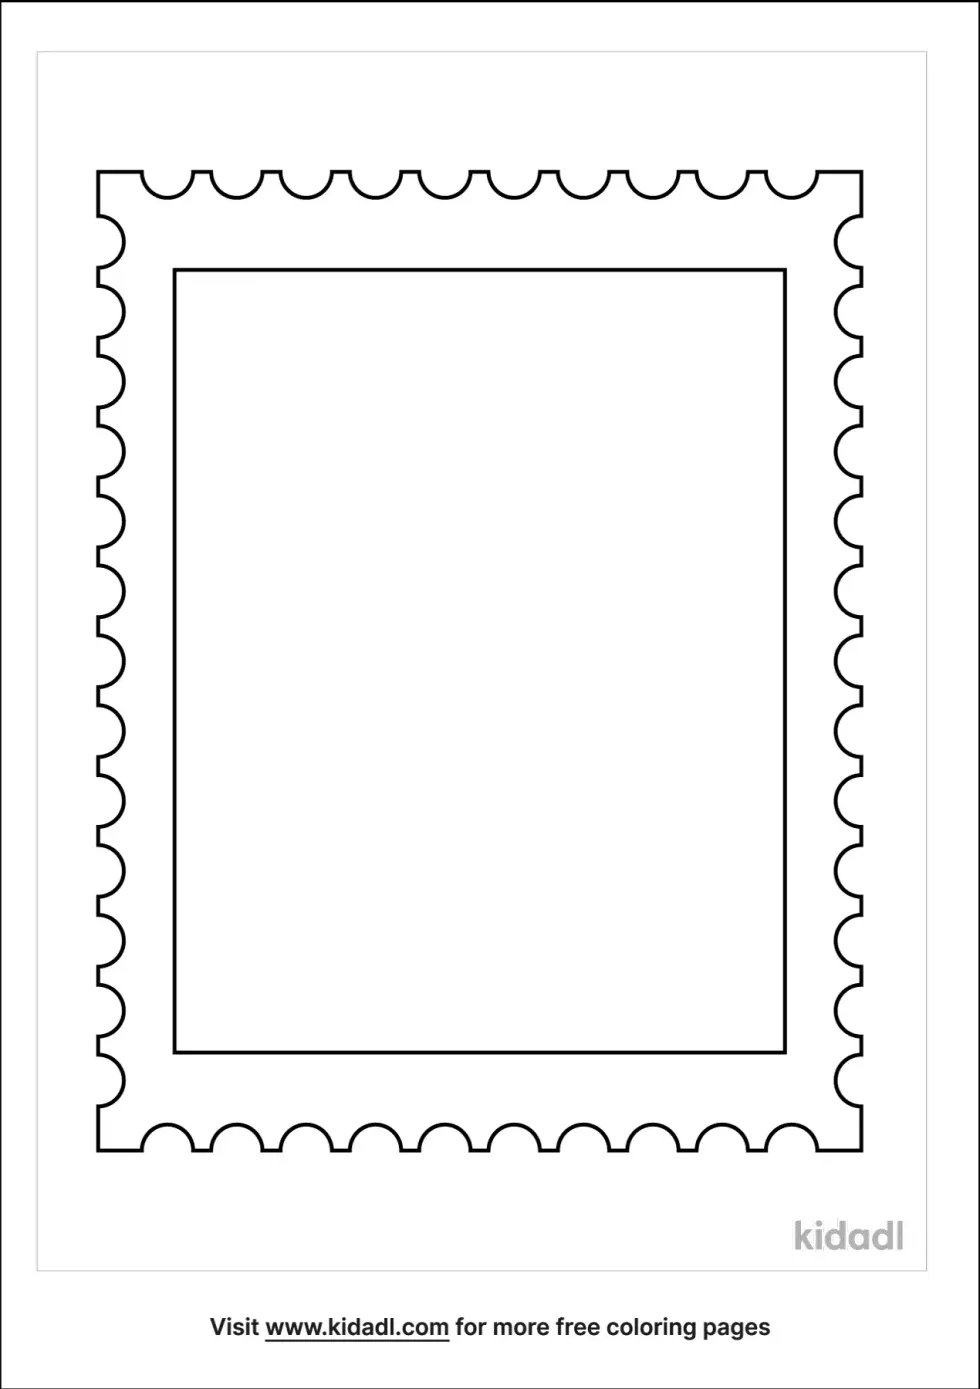 Blank Postage Stamp Coloring Page